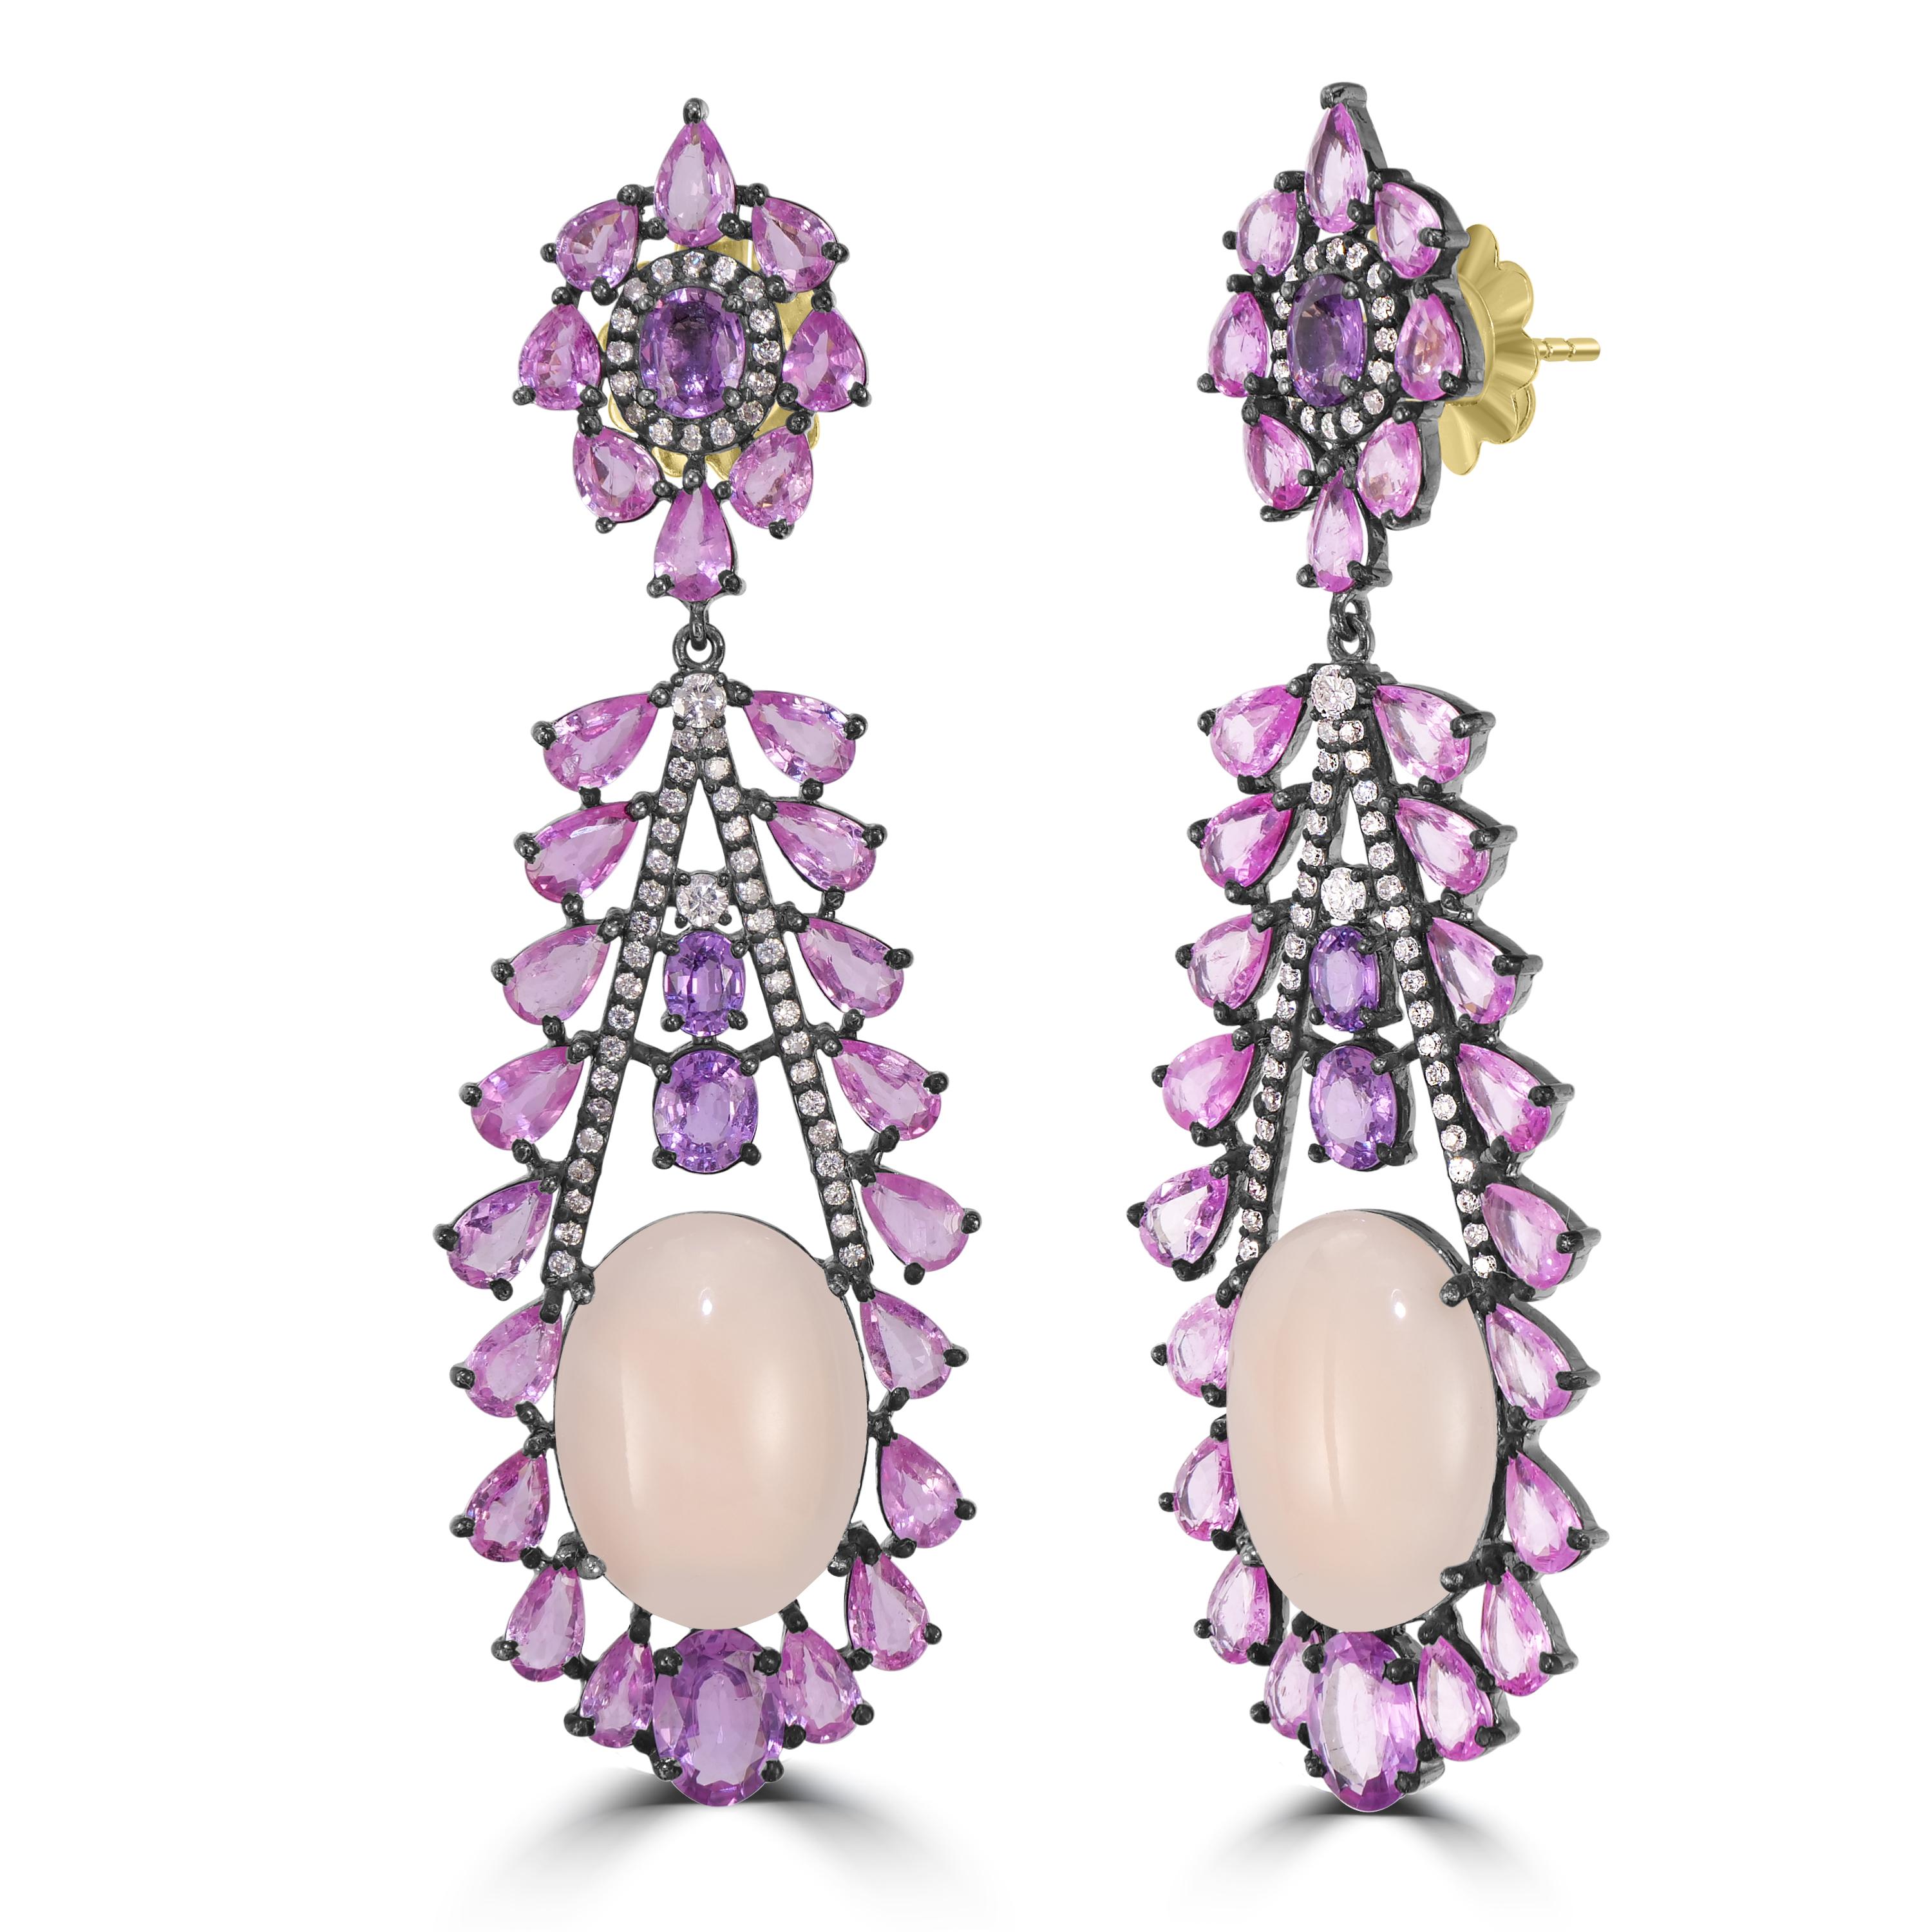 Step into a world of botanical elegance with our Victorian 27.85 Cttw. Peach Coral, Diamond, and Multi Sapphire Floral Dangle Earrings. A true floral masterpiece, these earrings capture the essence of a blooming garden with meticulous craftsmanship